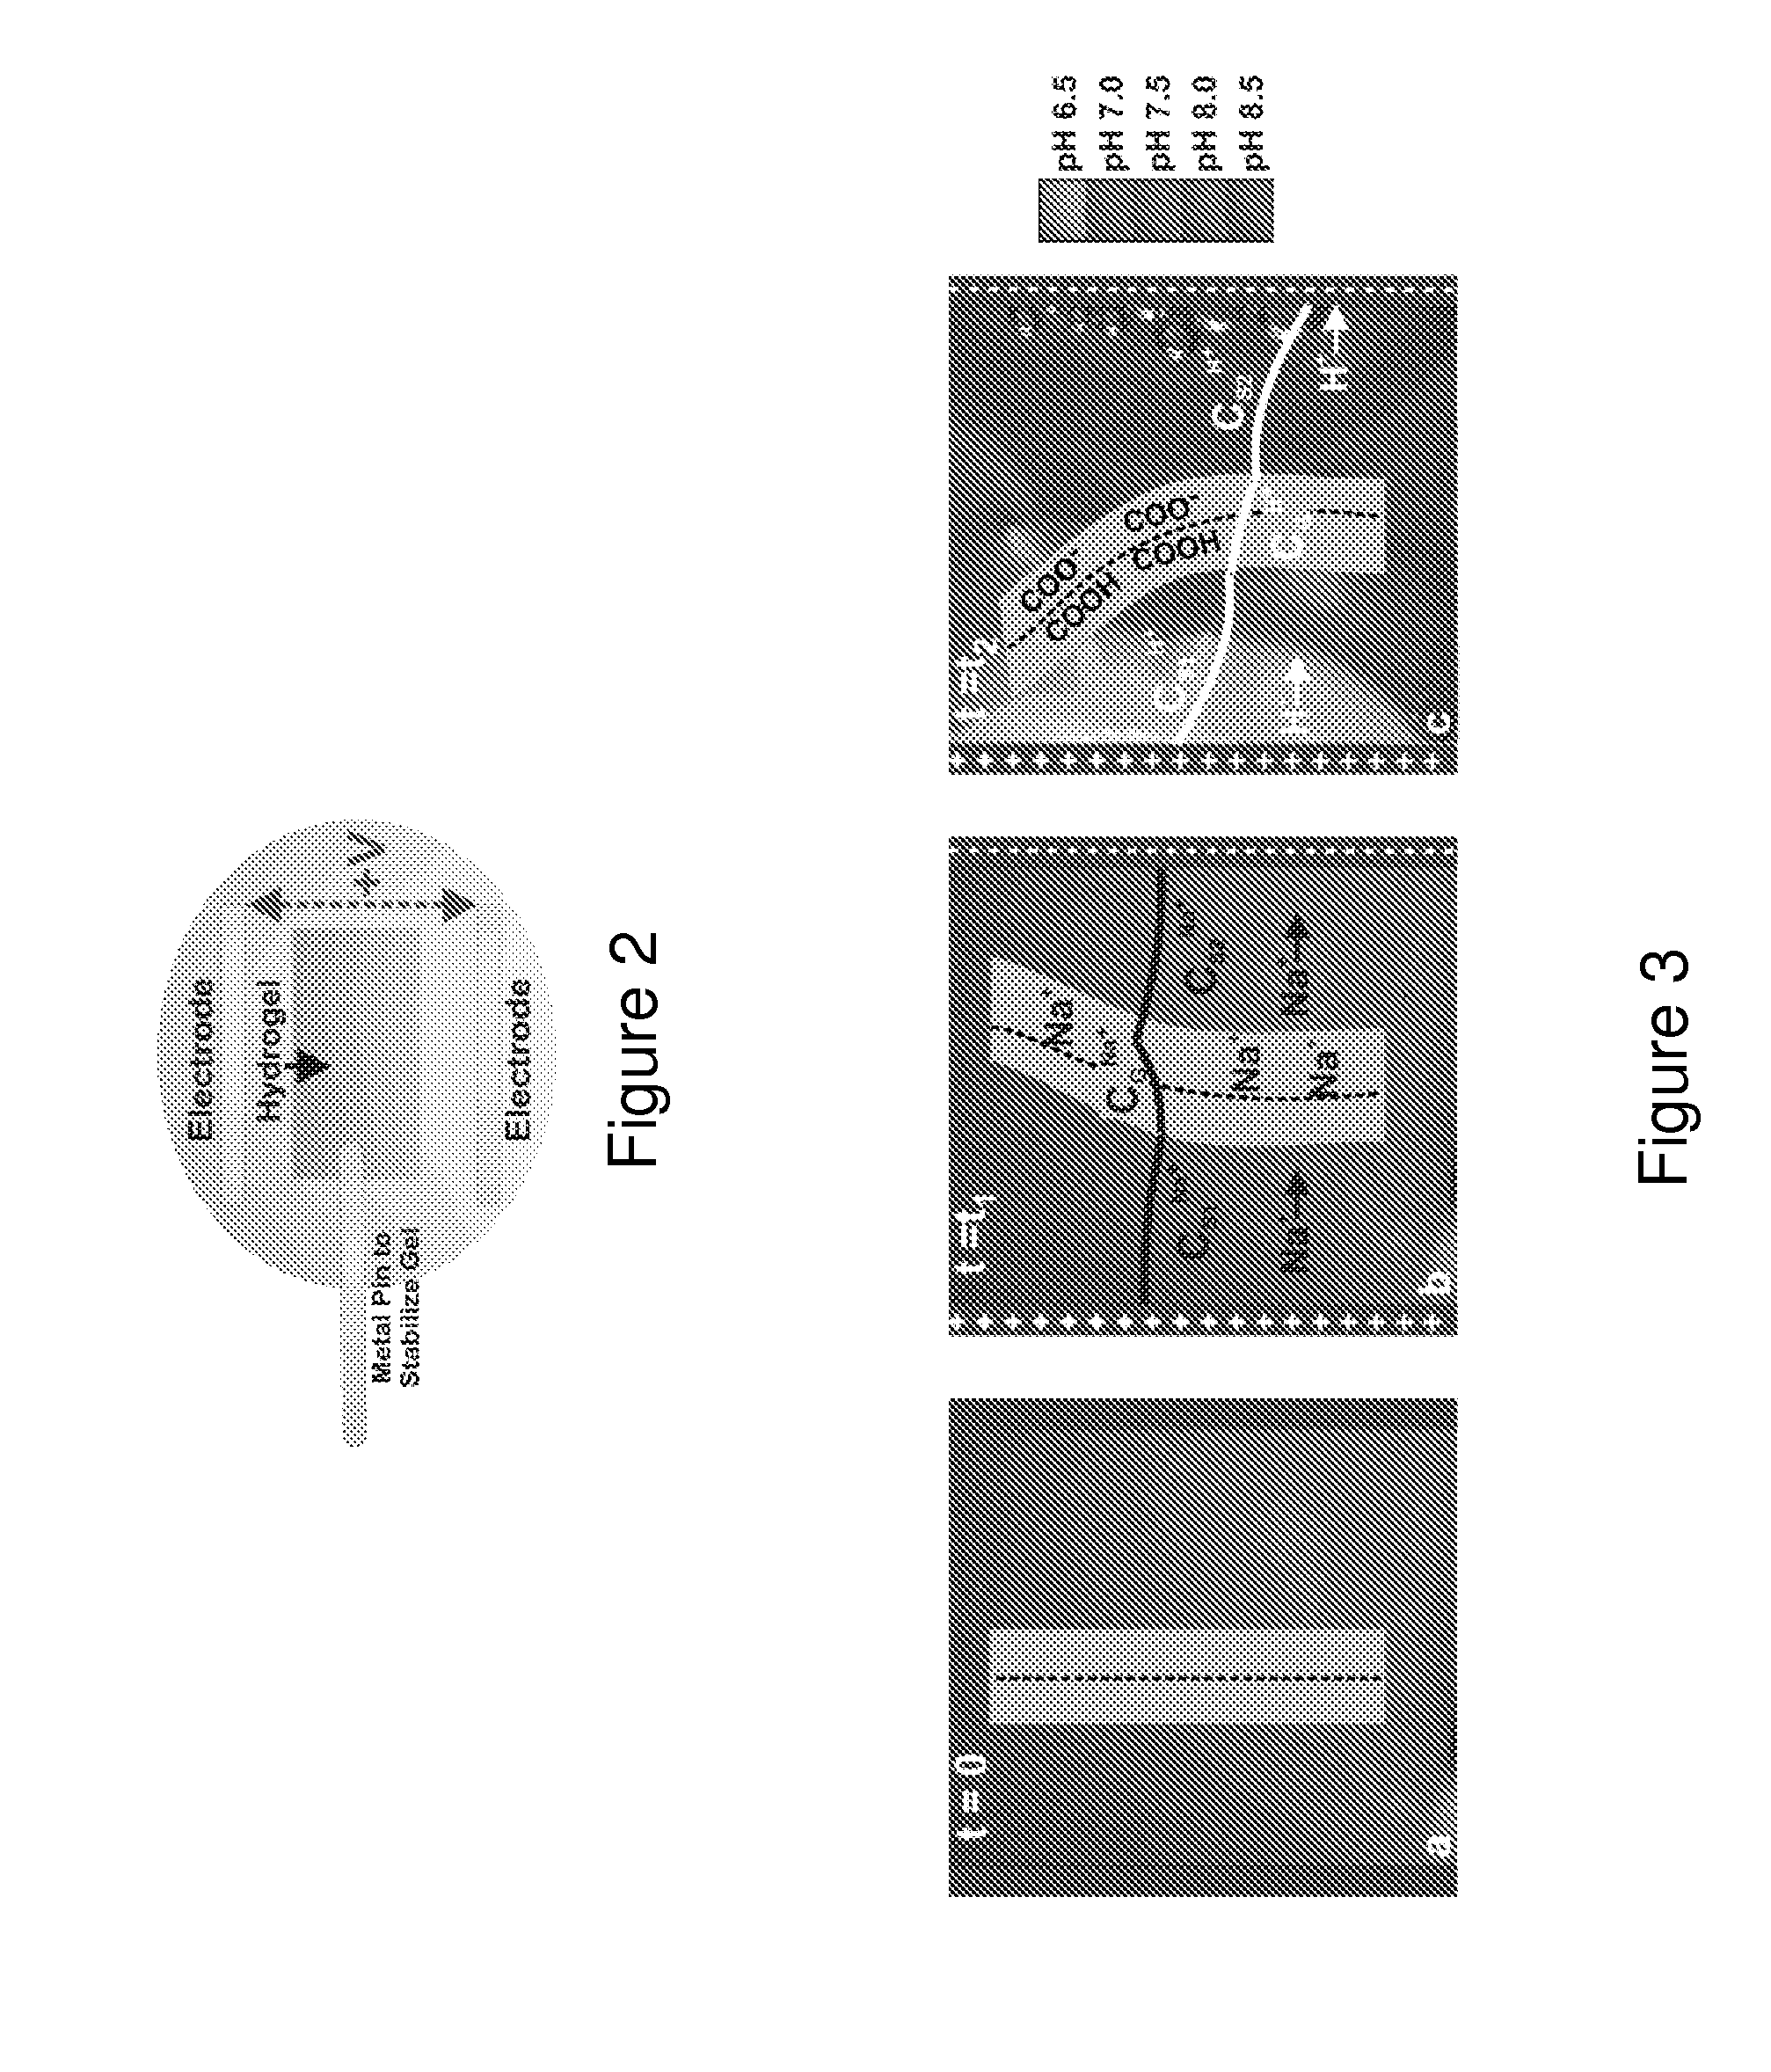 Porous electroactive hydrogels and uses thereof